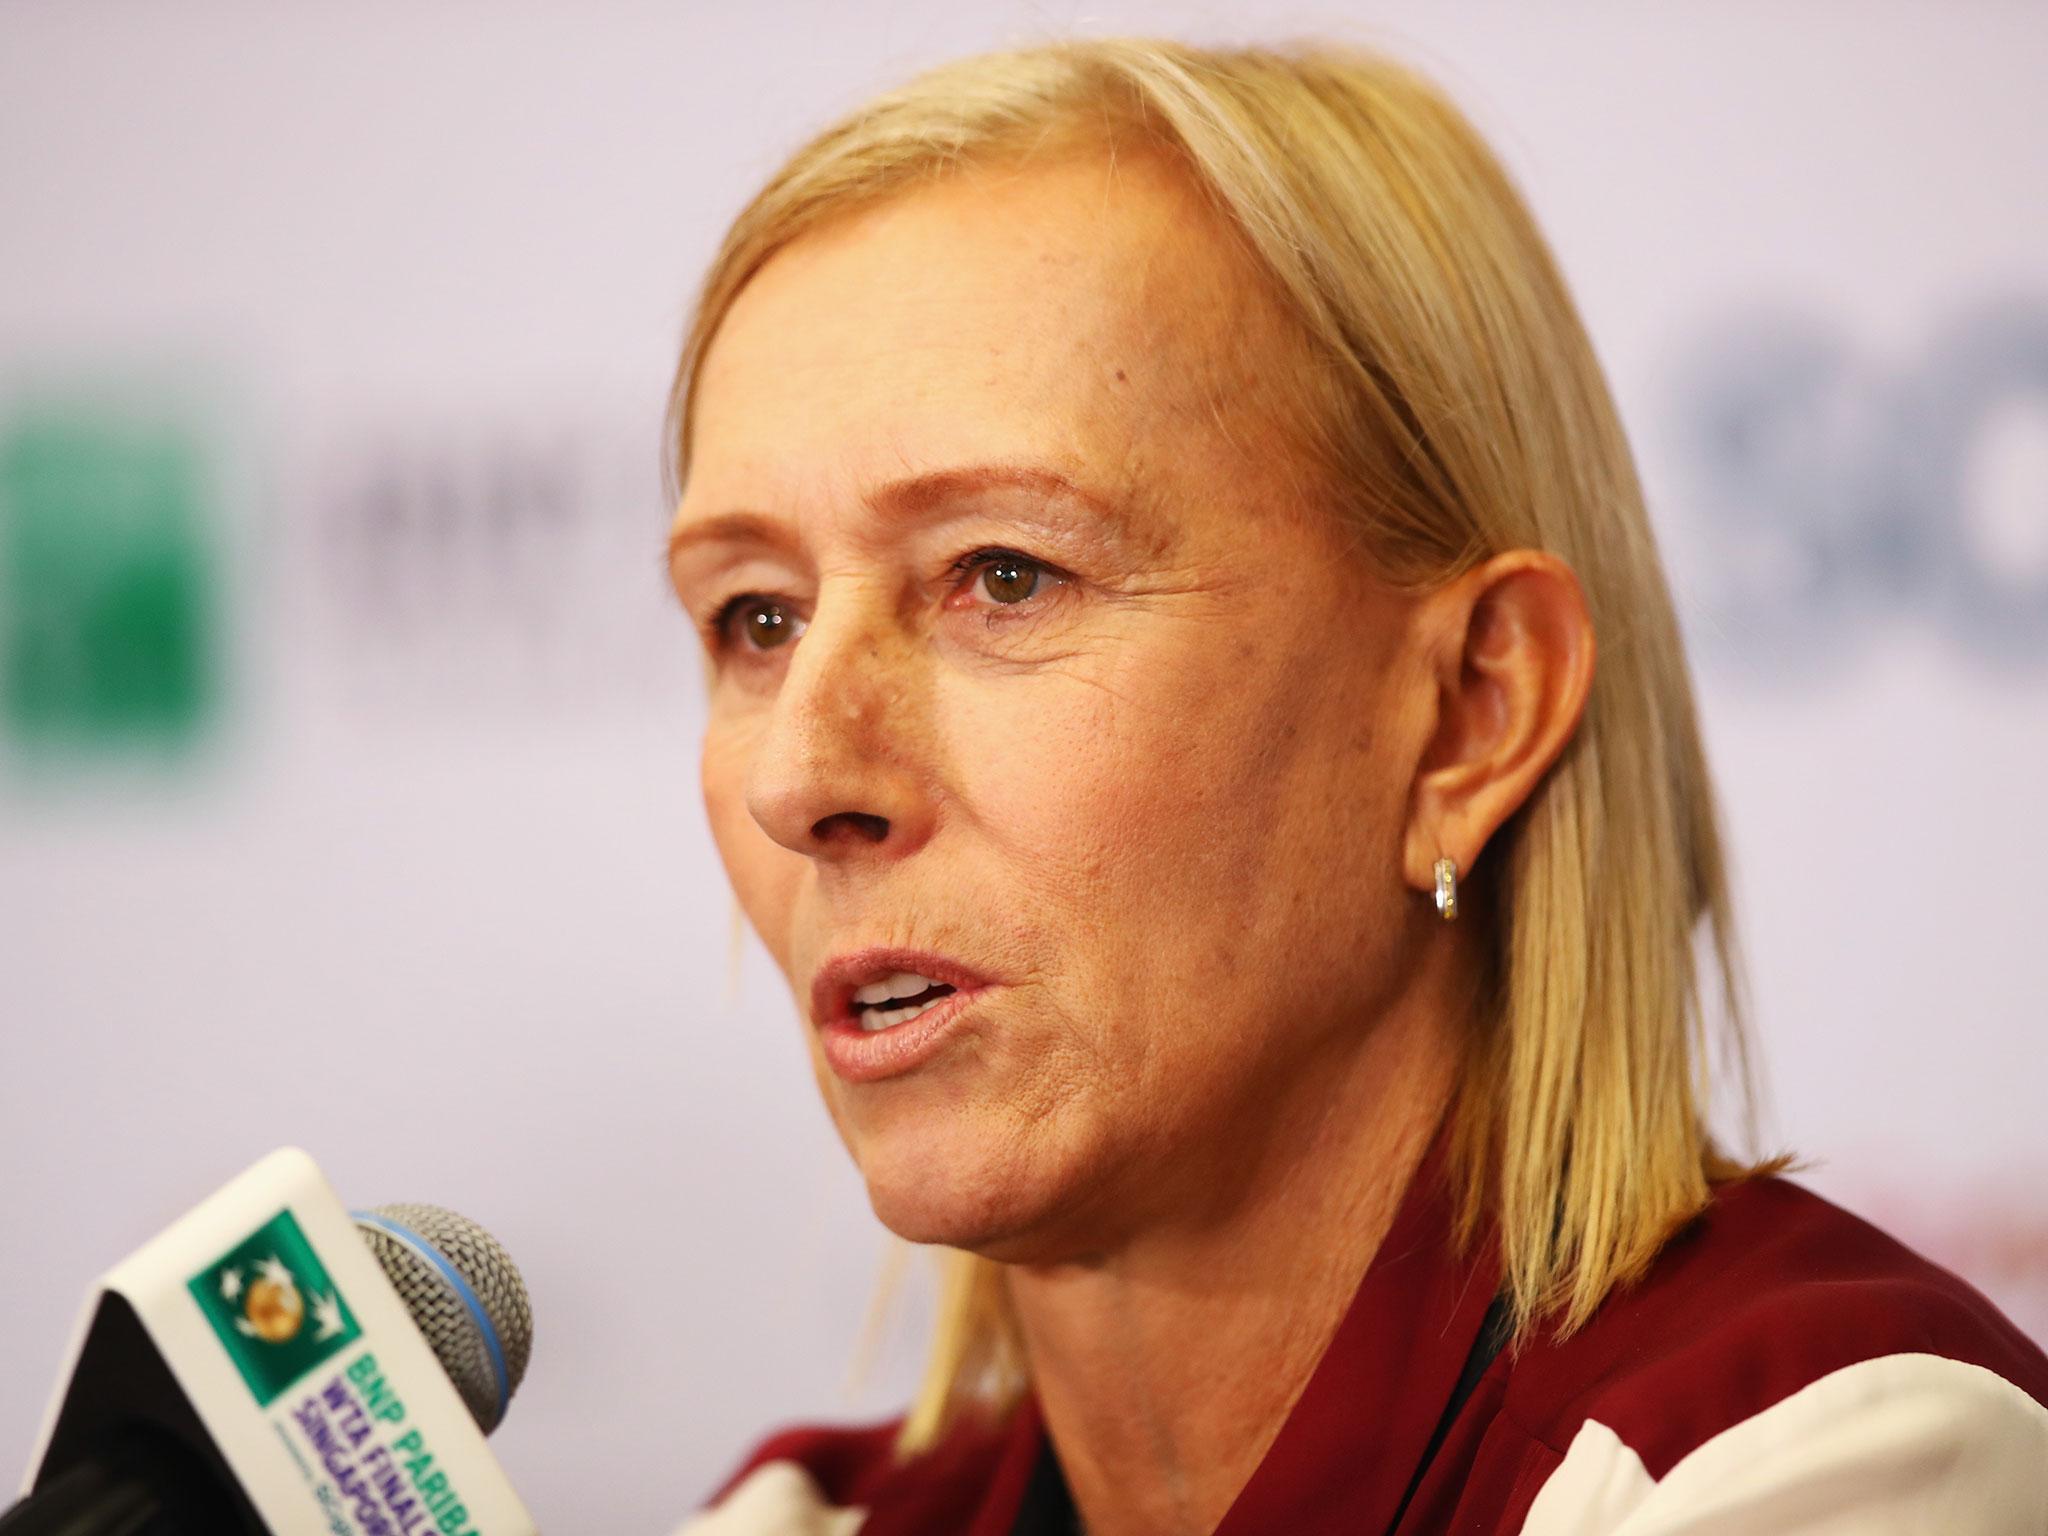 Navratilova, a prominent advocate for LGBT rights, criticised Court for her views